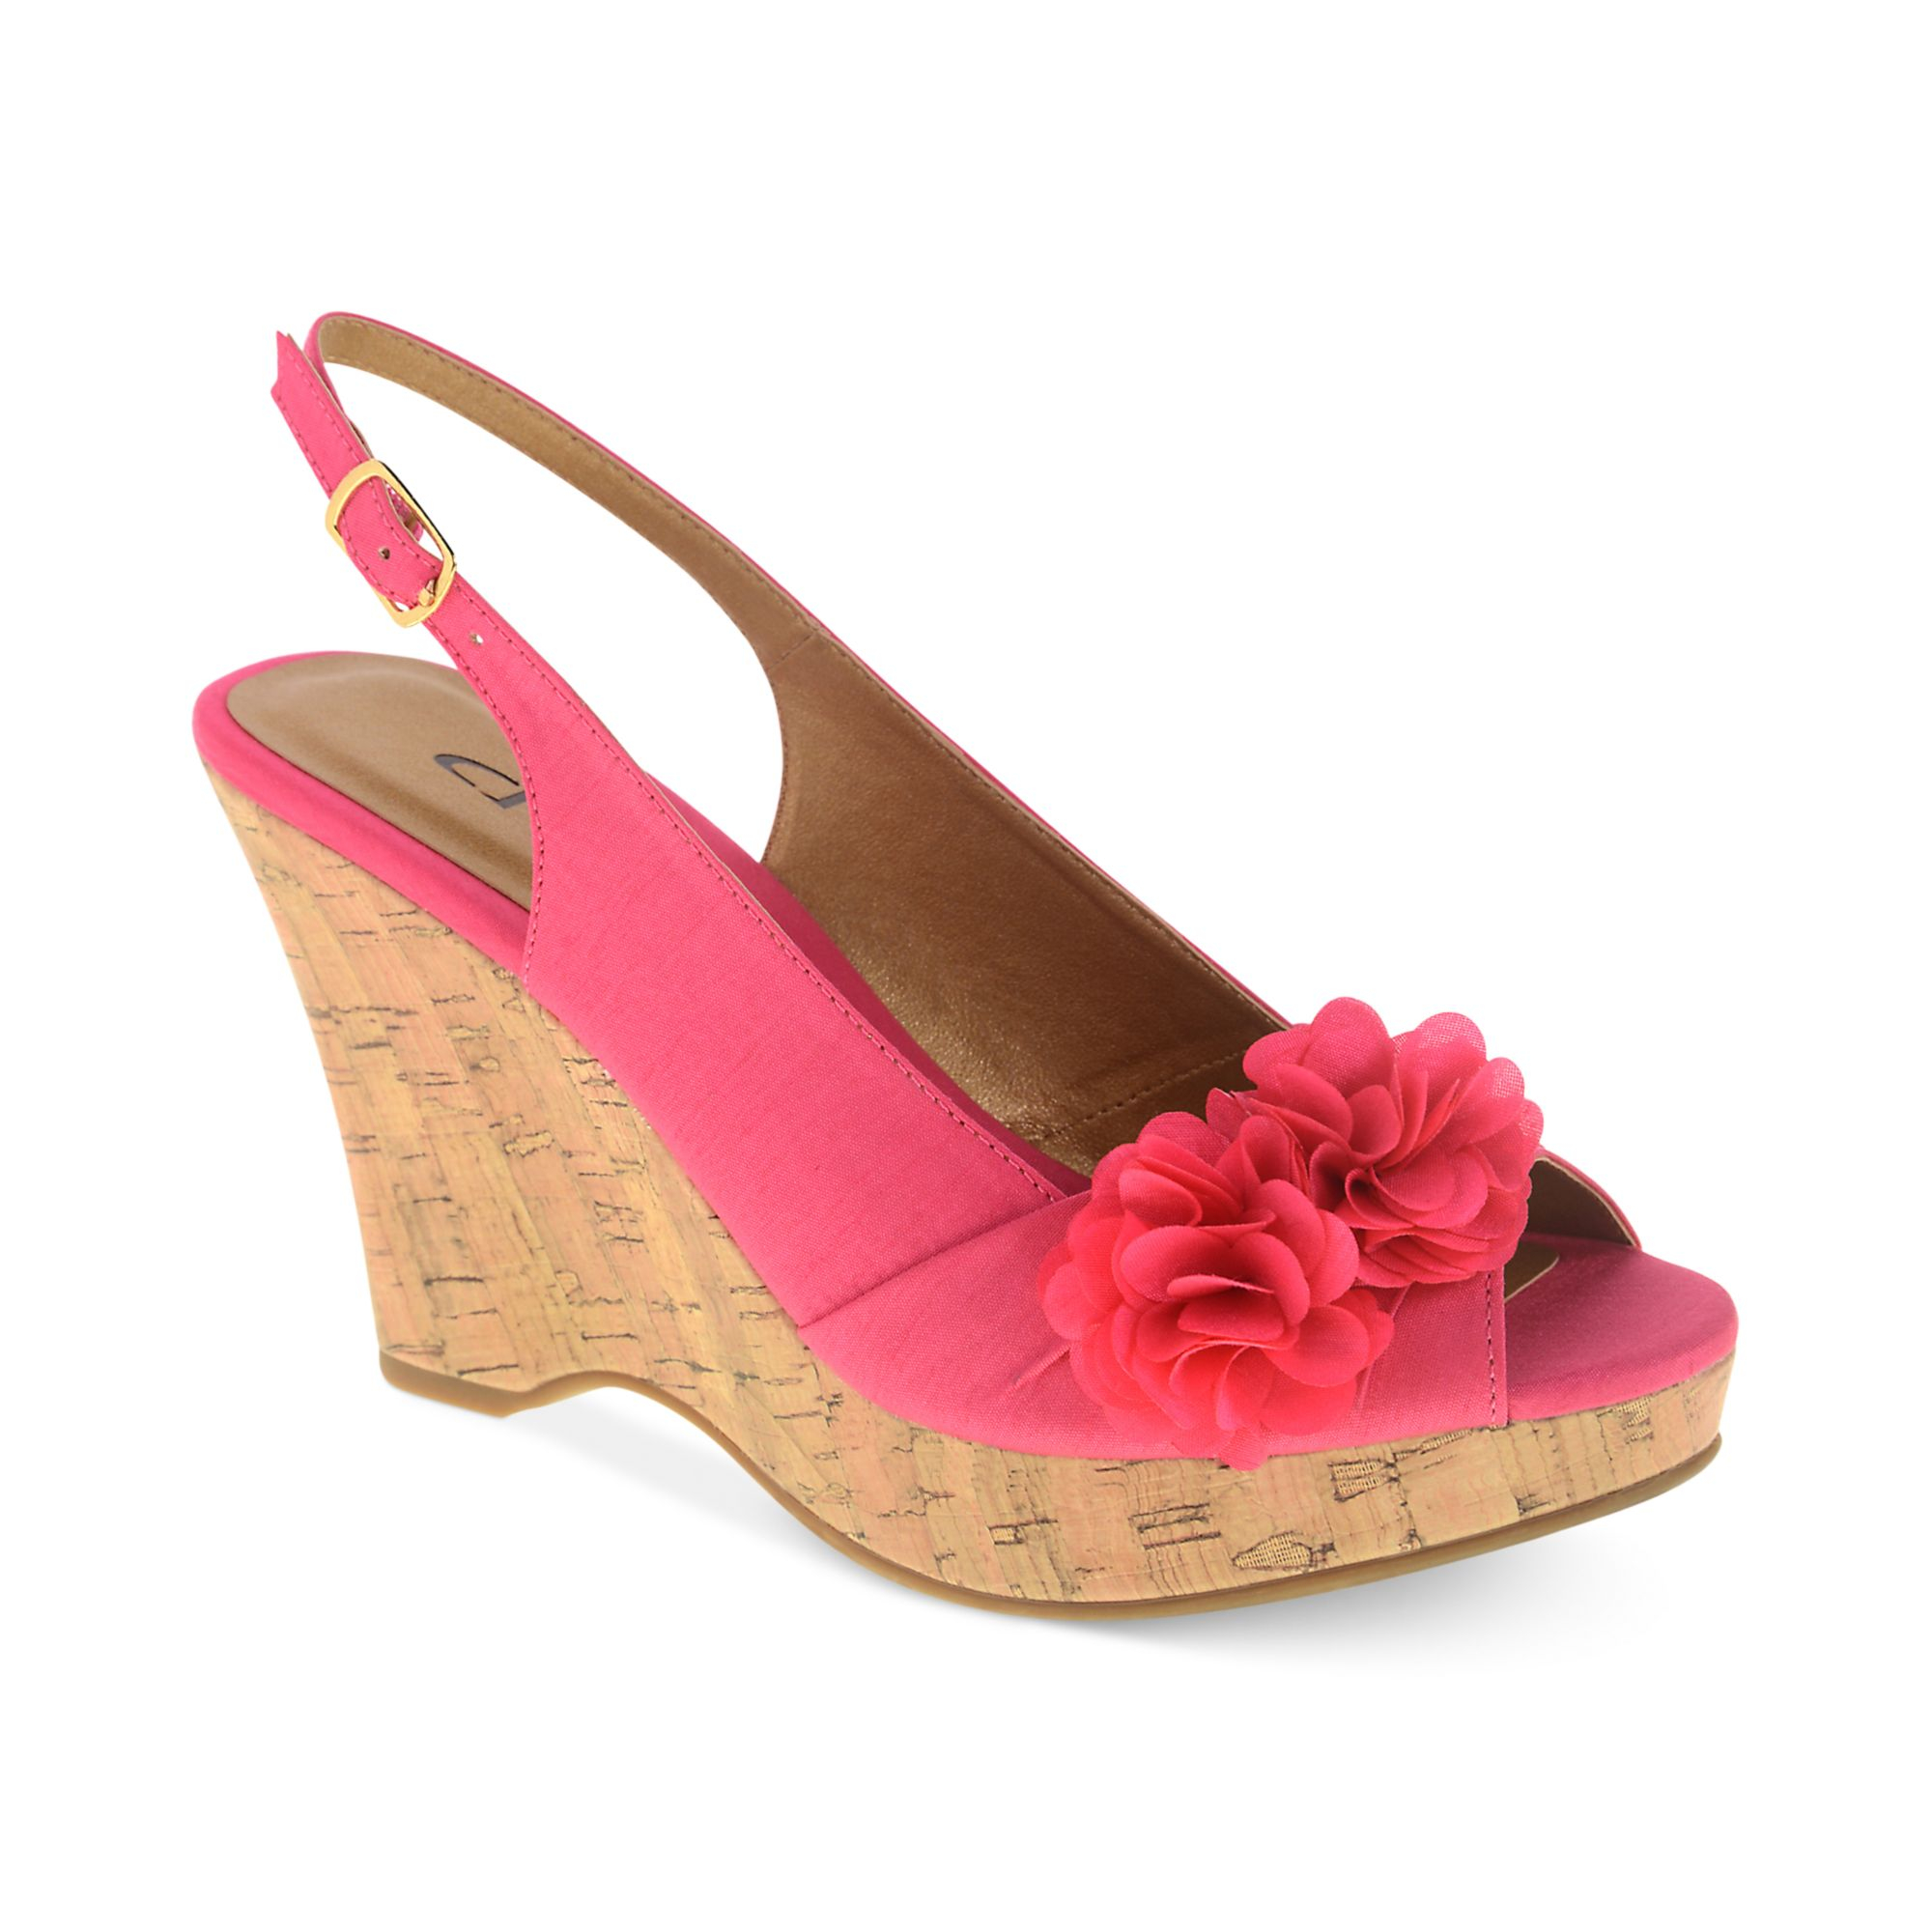 Chinese Laundry Cl By Laundry Isis Platform Wedge Sandals in Pink | Lyst